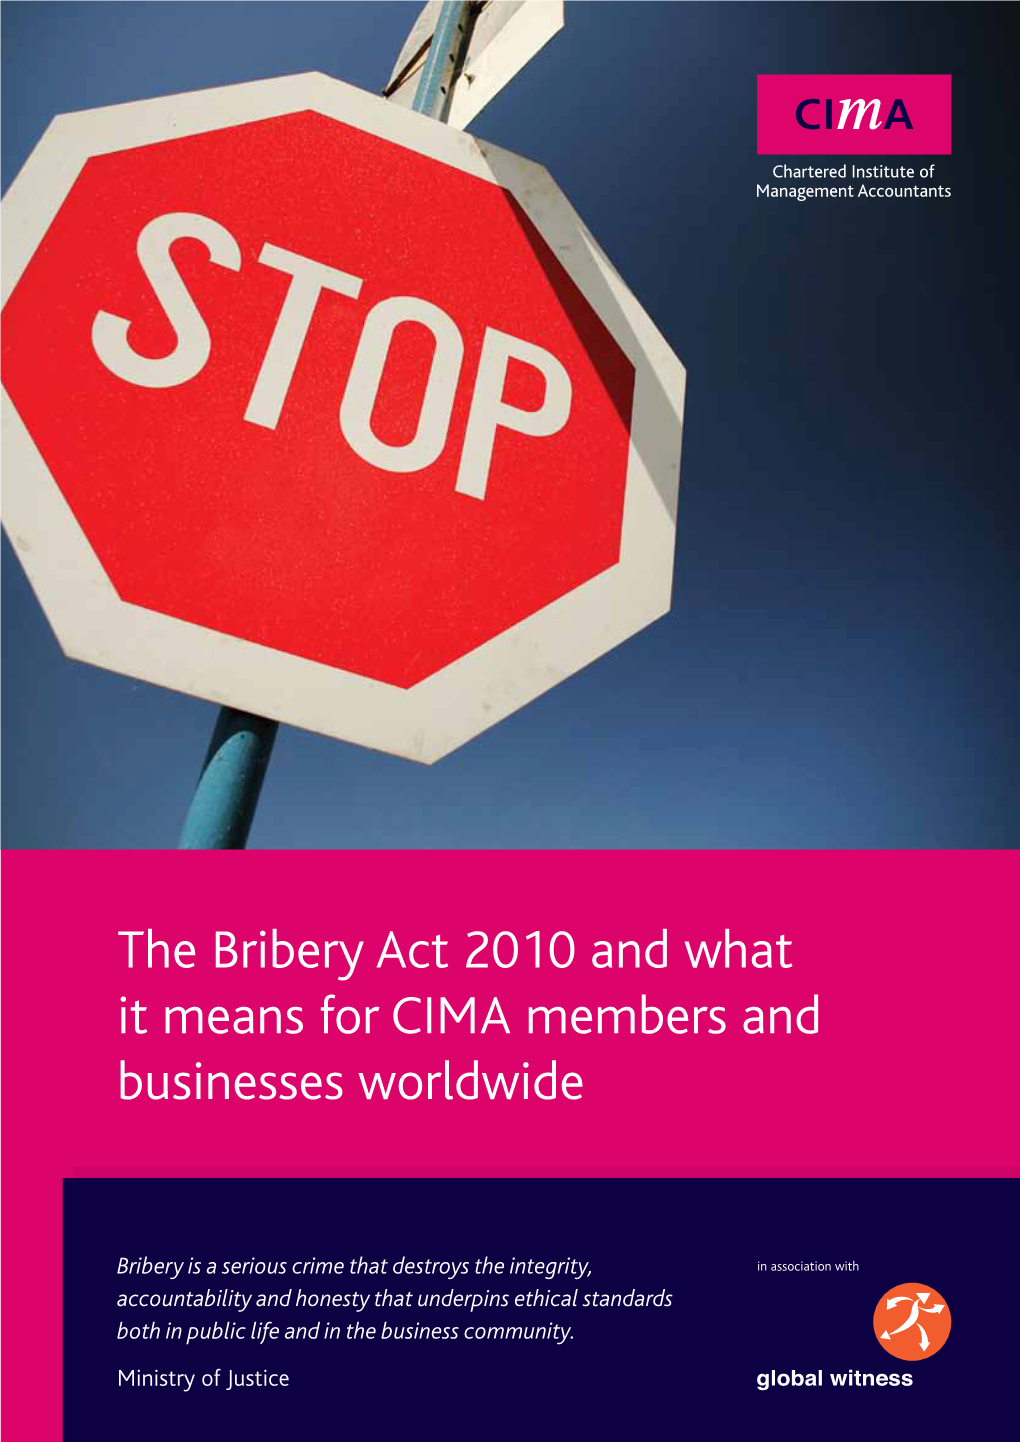 The Bribery Act 2010 and What It Means for CIMA Members and Businesses Worldwide